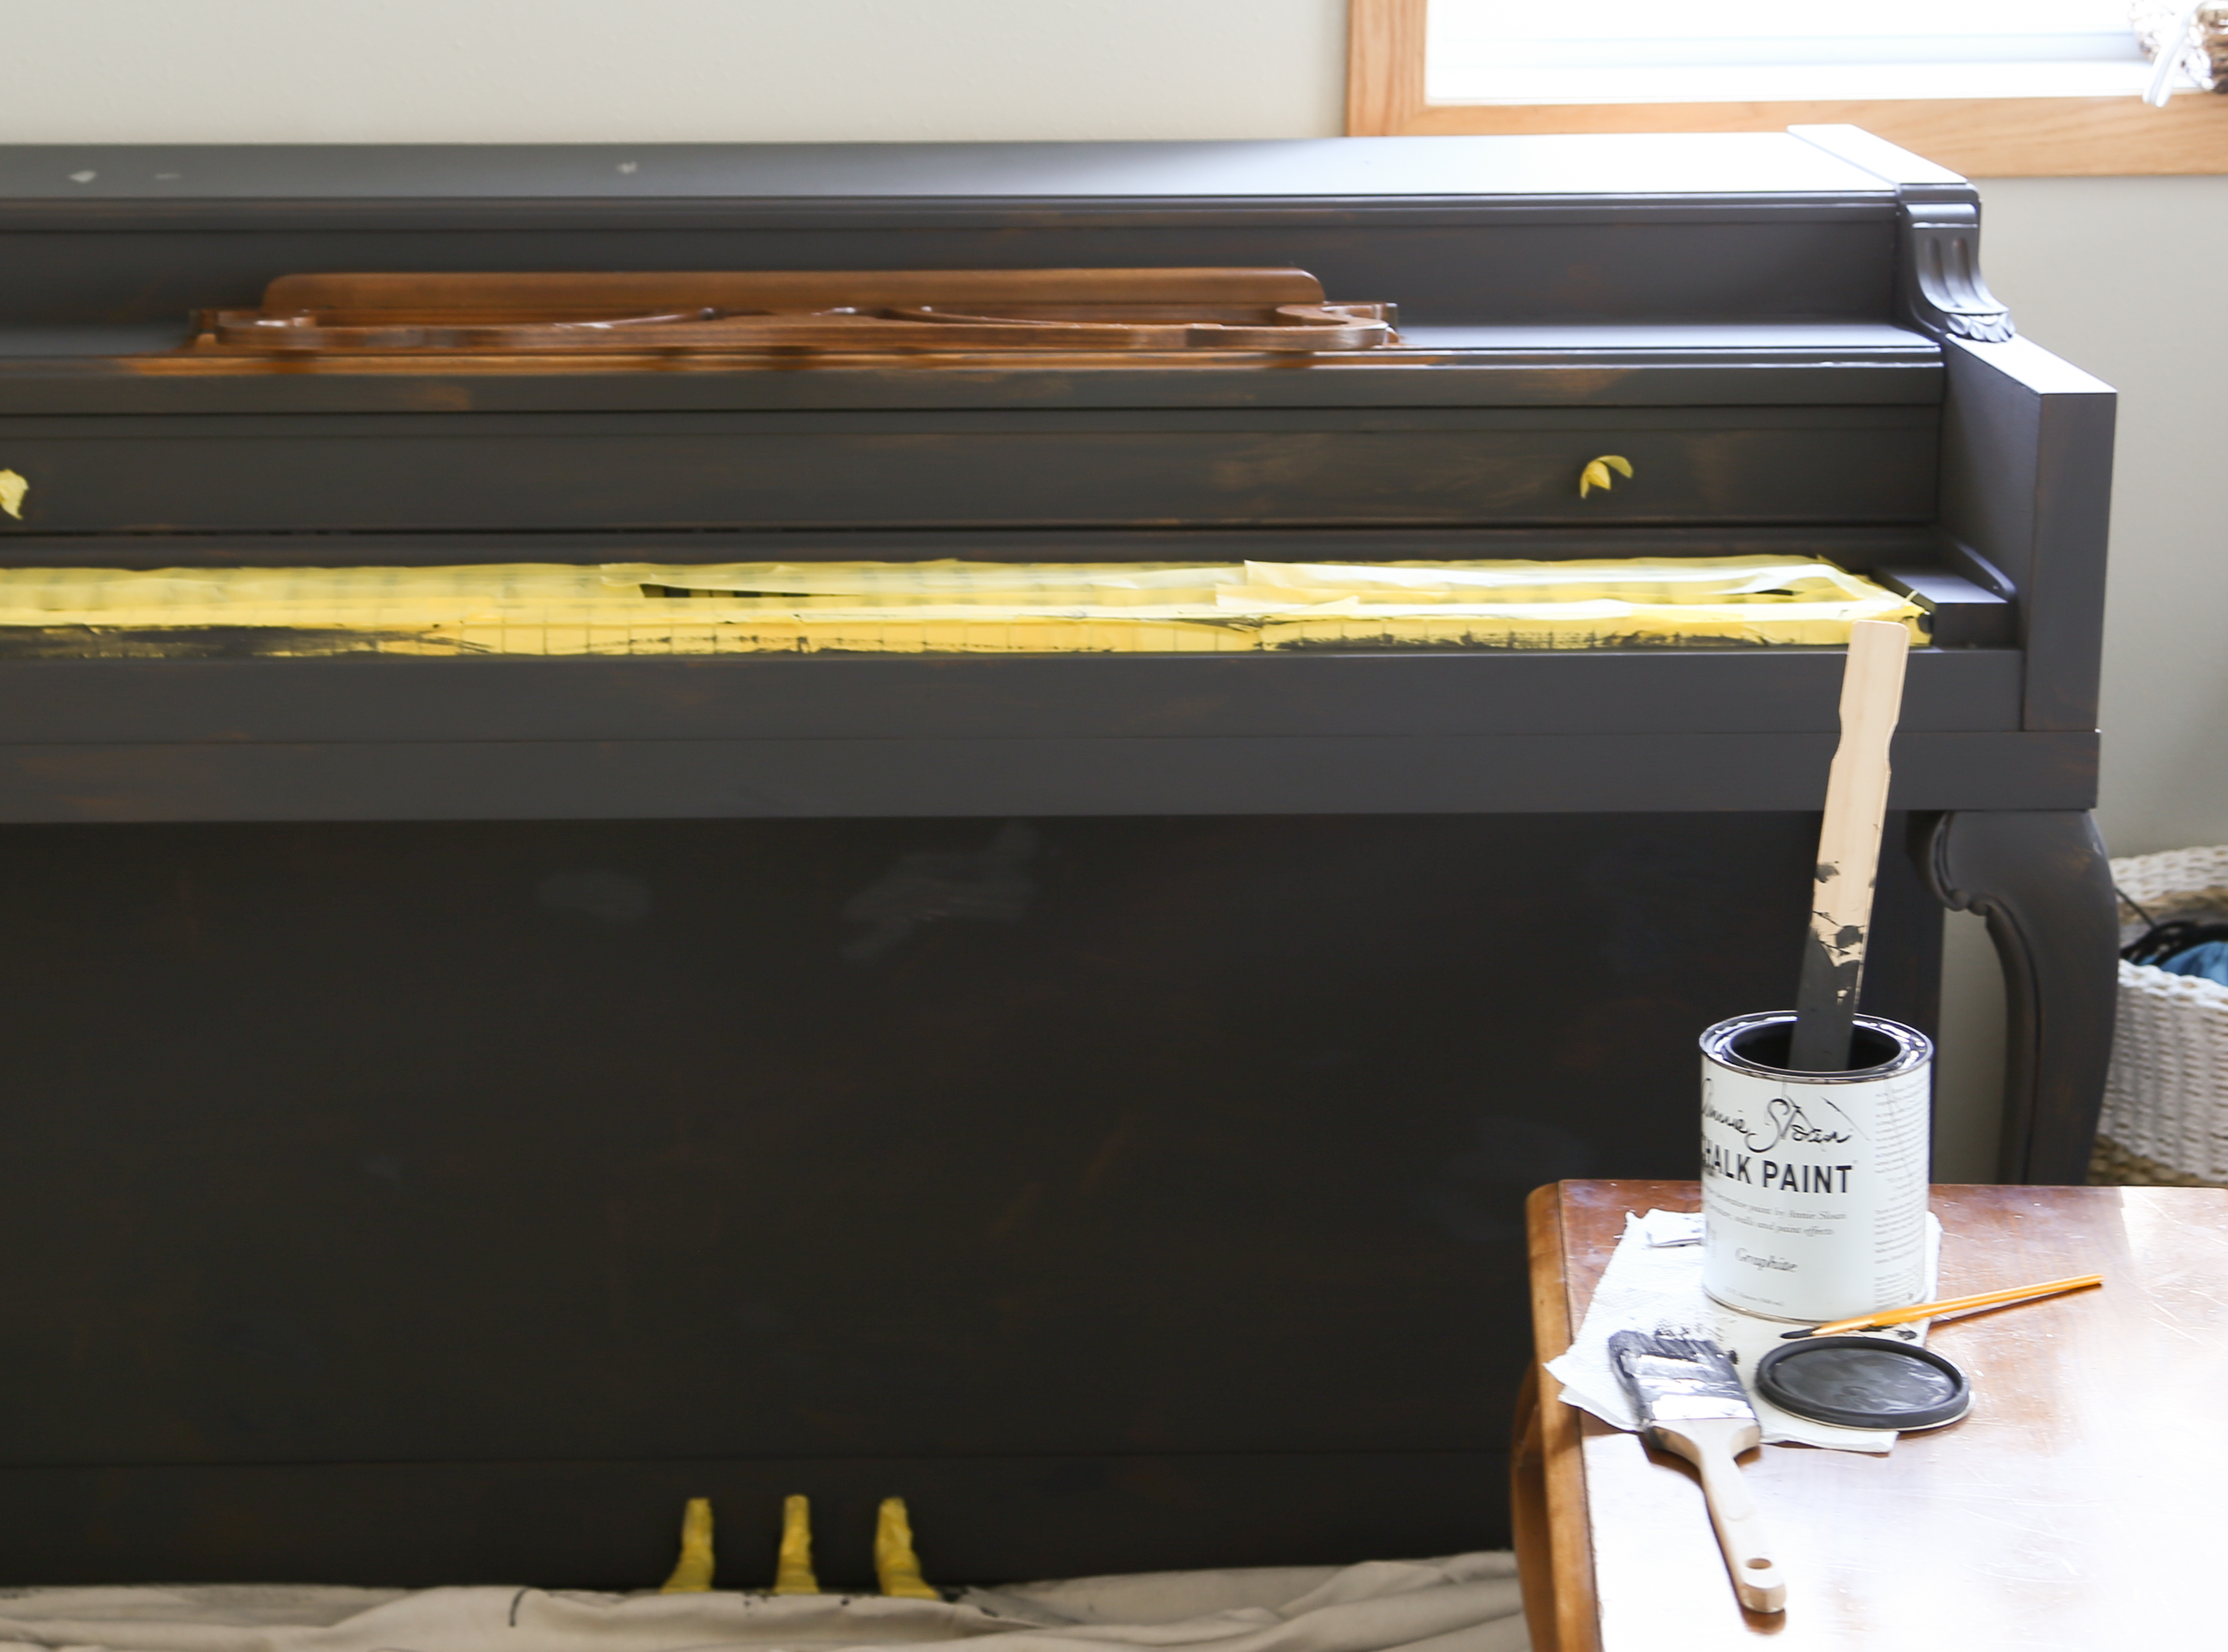 Apply two coats of chalk paint and furniture wax to the piano for a brand new piano!